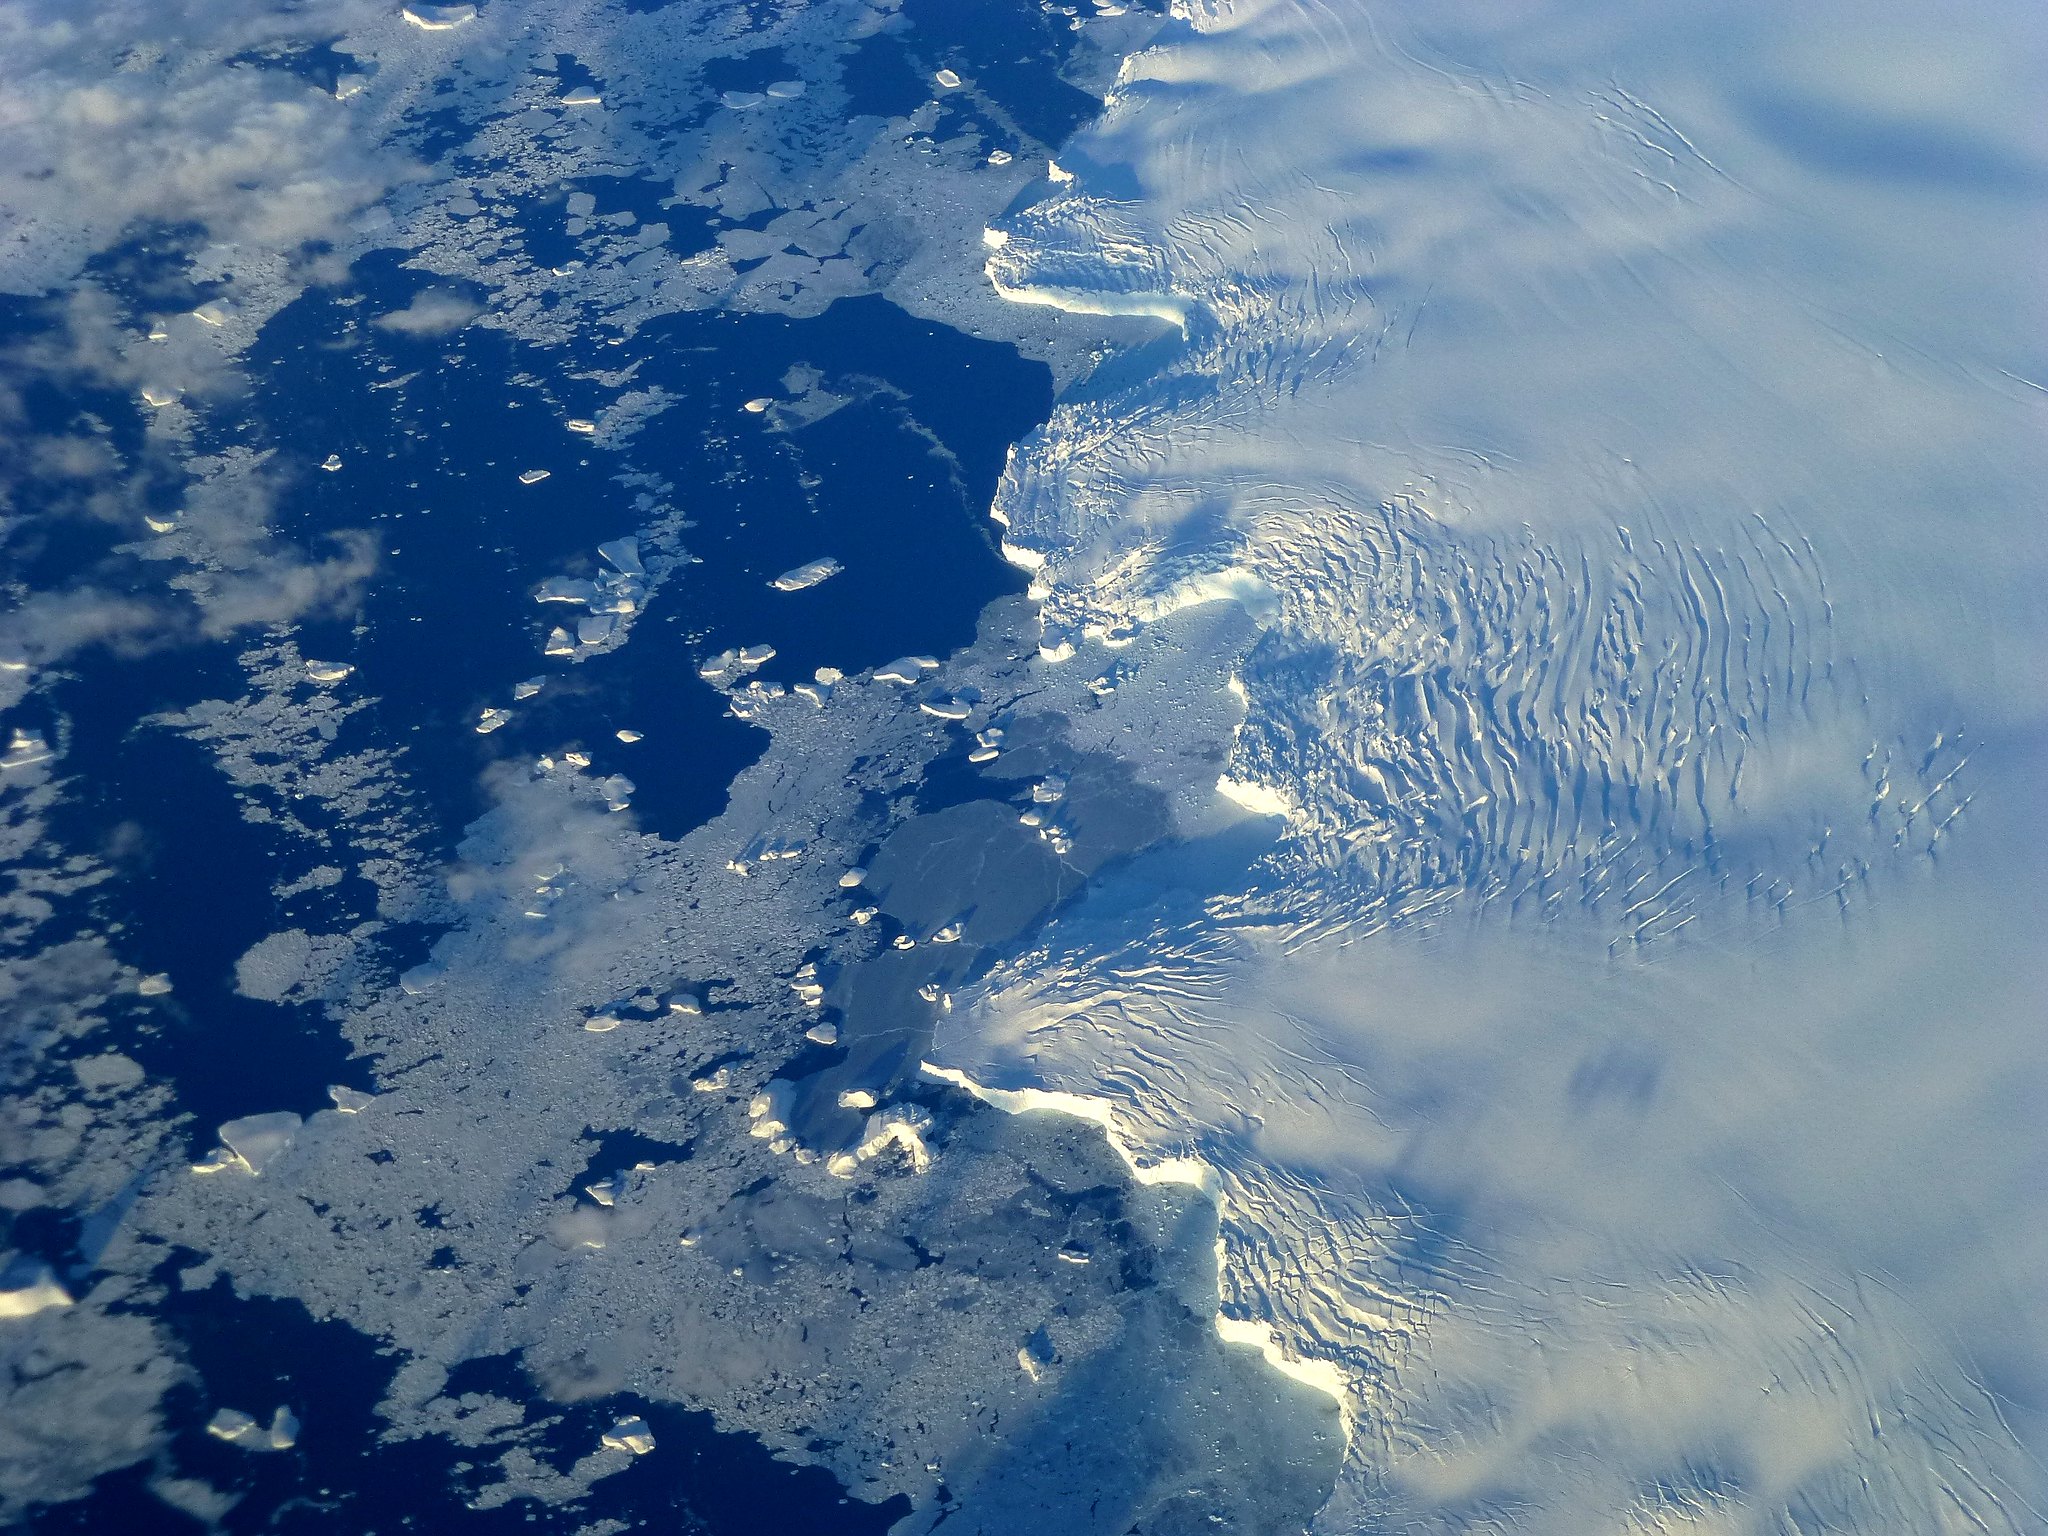 Edge of an ice shelf in Adelaide Island, off the Antarctic Peninsula (by Maria-Jose Vinas courtesy of NASA Goddard Space Flight Center CC BY 2.0 DEED via Flickr).